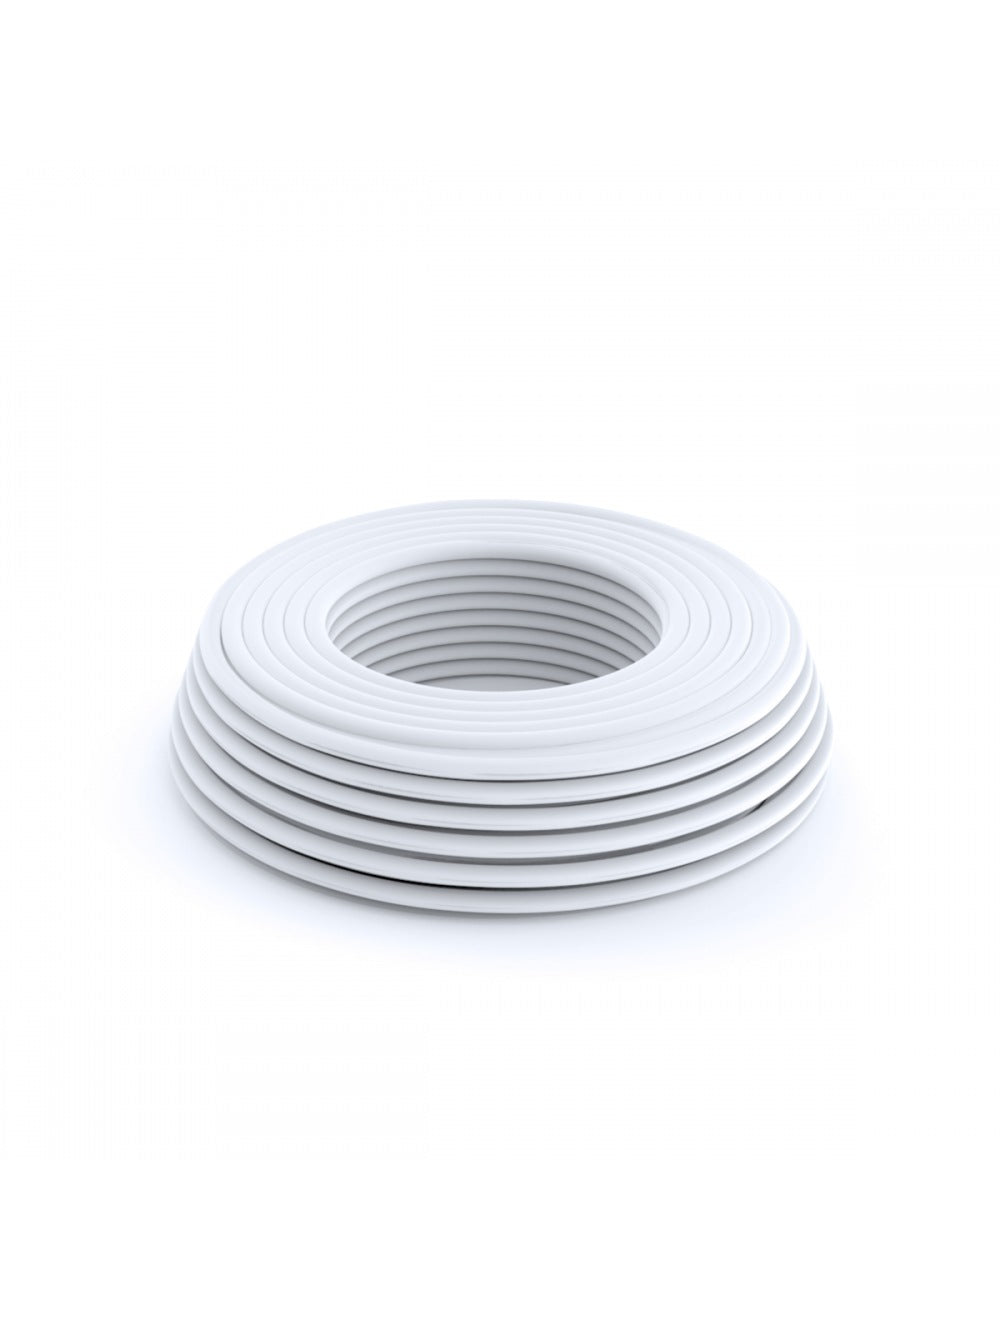 16-17MM DOUBLE LAYER TUBING - 100FT